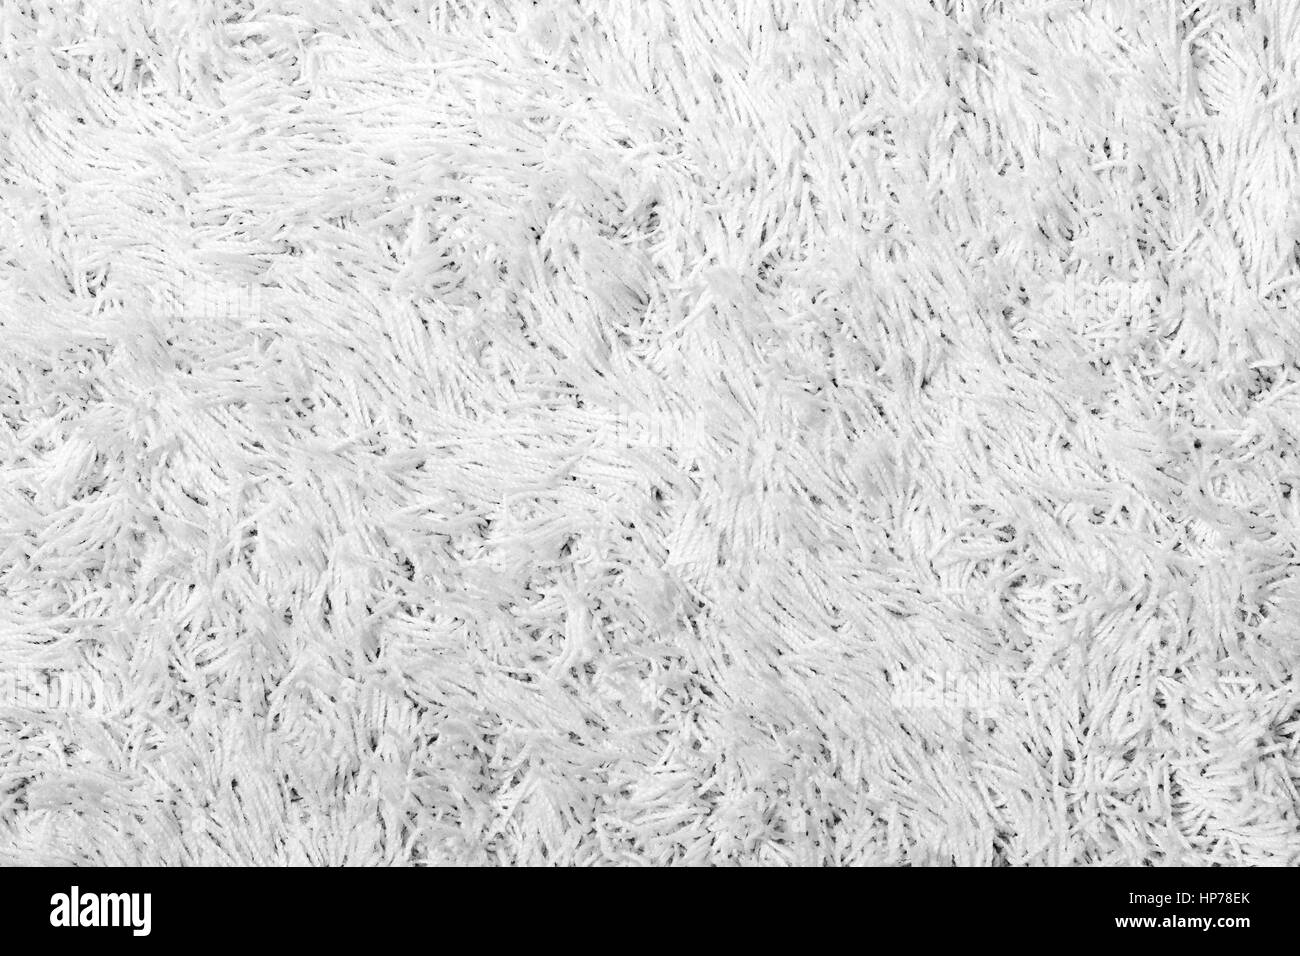 Carpet texture Black and White Stock Photos & Images - Alamy